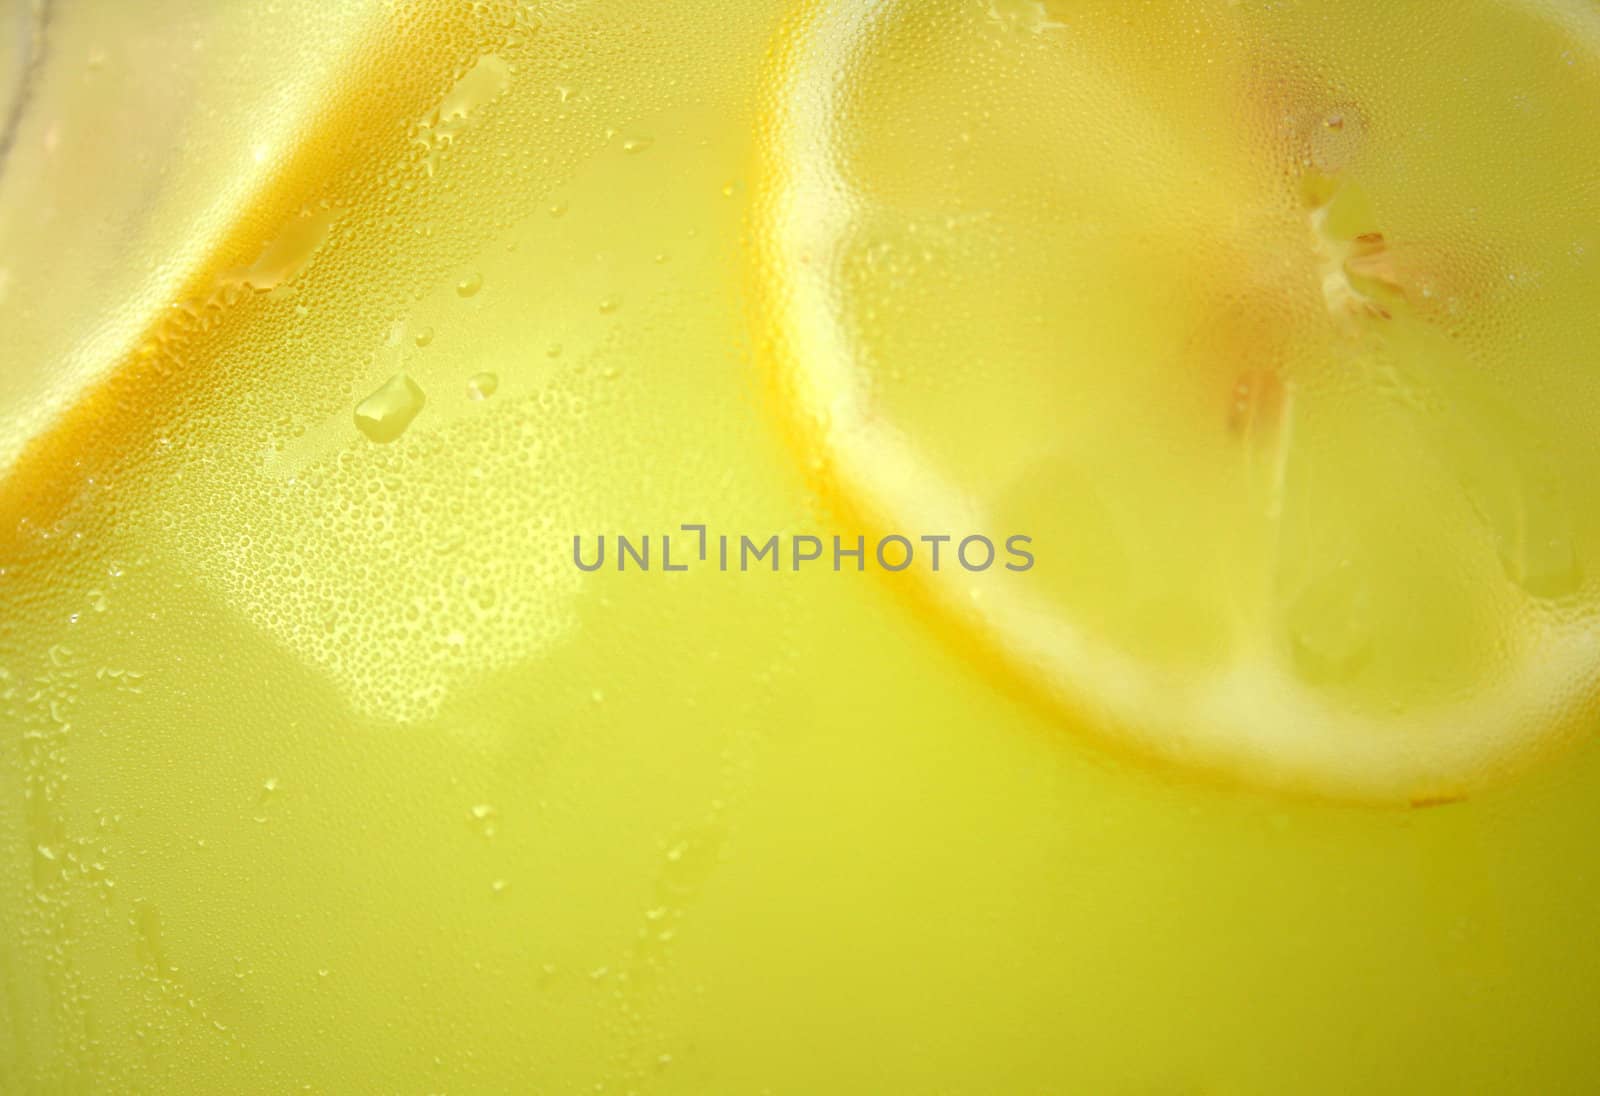 Close up of a pitcher full of lemonade with fresh lemons.  The glass pitcher has sweat beeds on it which adds texture.